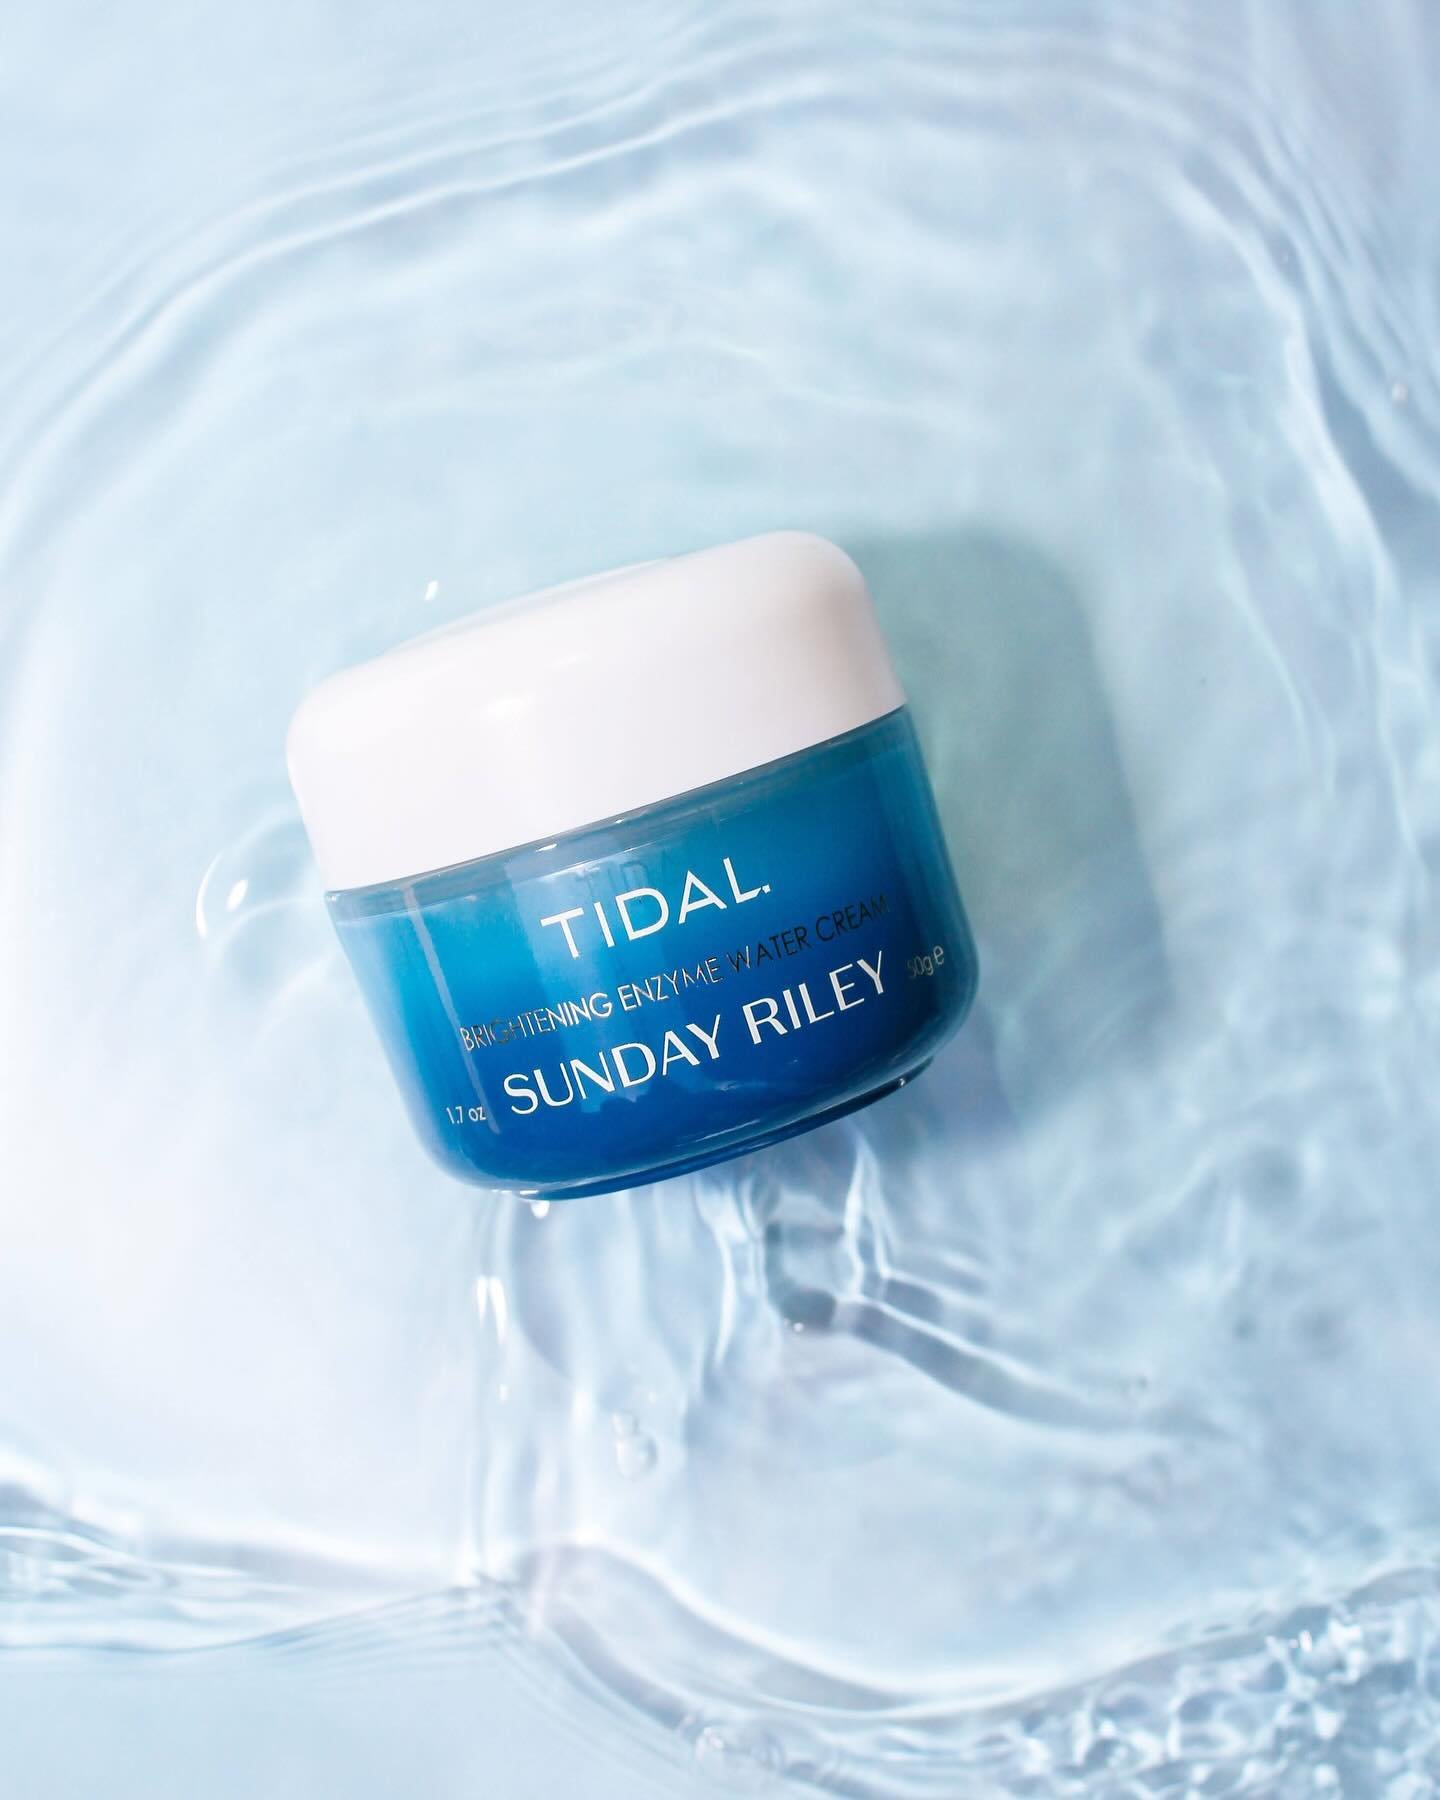 Water shots are quickly becoming a Bleubird fave! They are visually impactful and it&rsquo;s a fun way to showcase products, this time starring @sundayriley Tidal Water Cream. No two water shots are ever the same and when you get the *one* it&rsquo;s